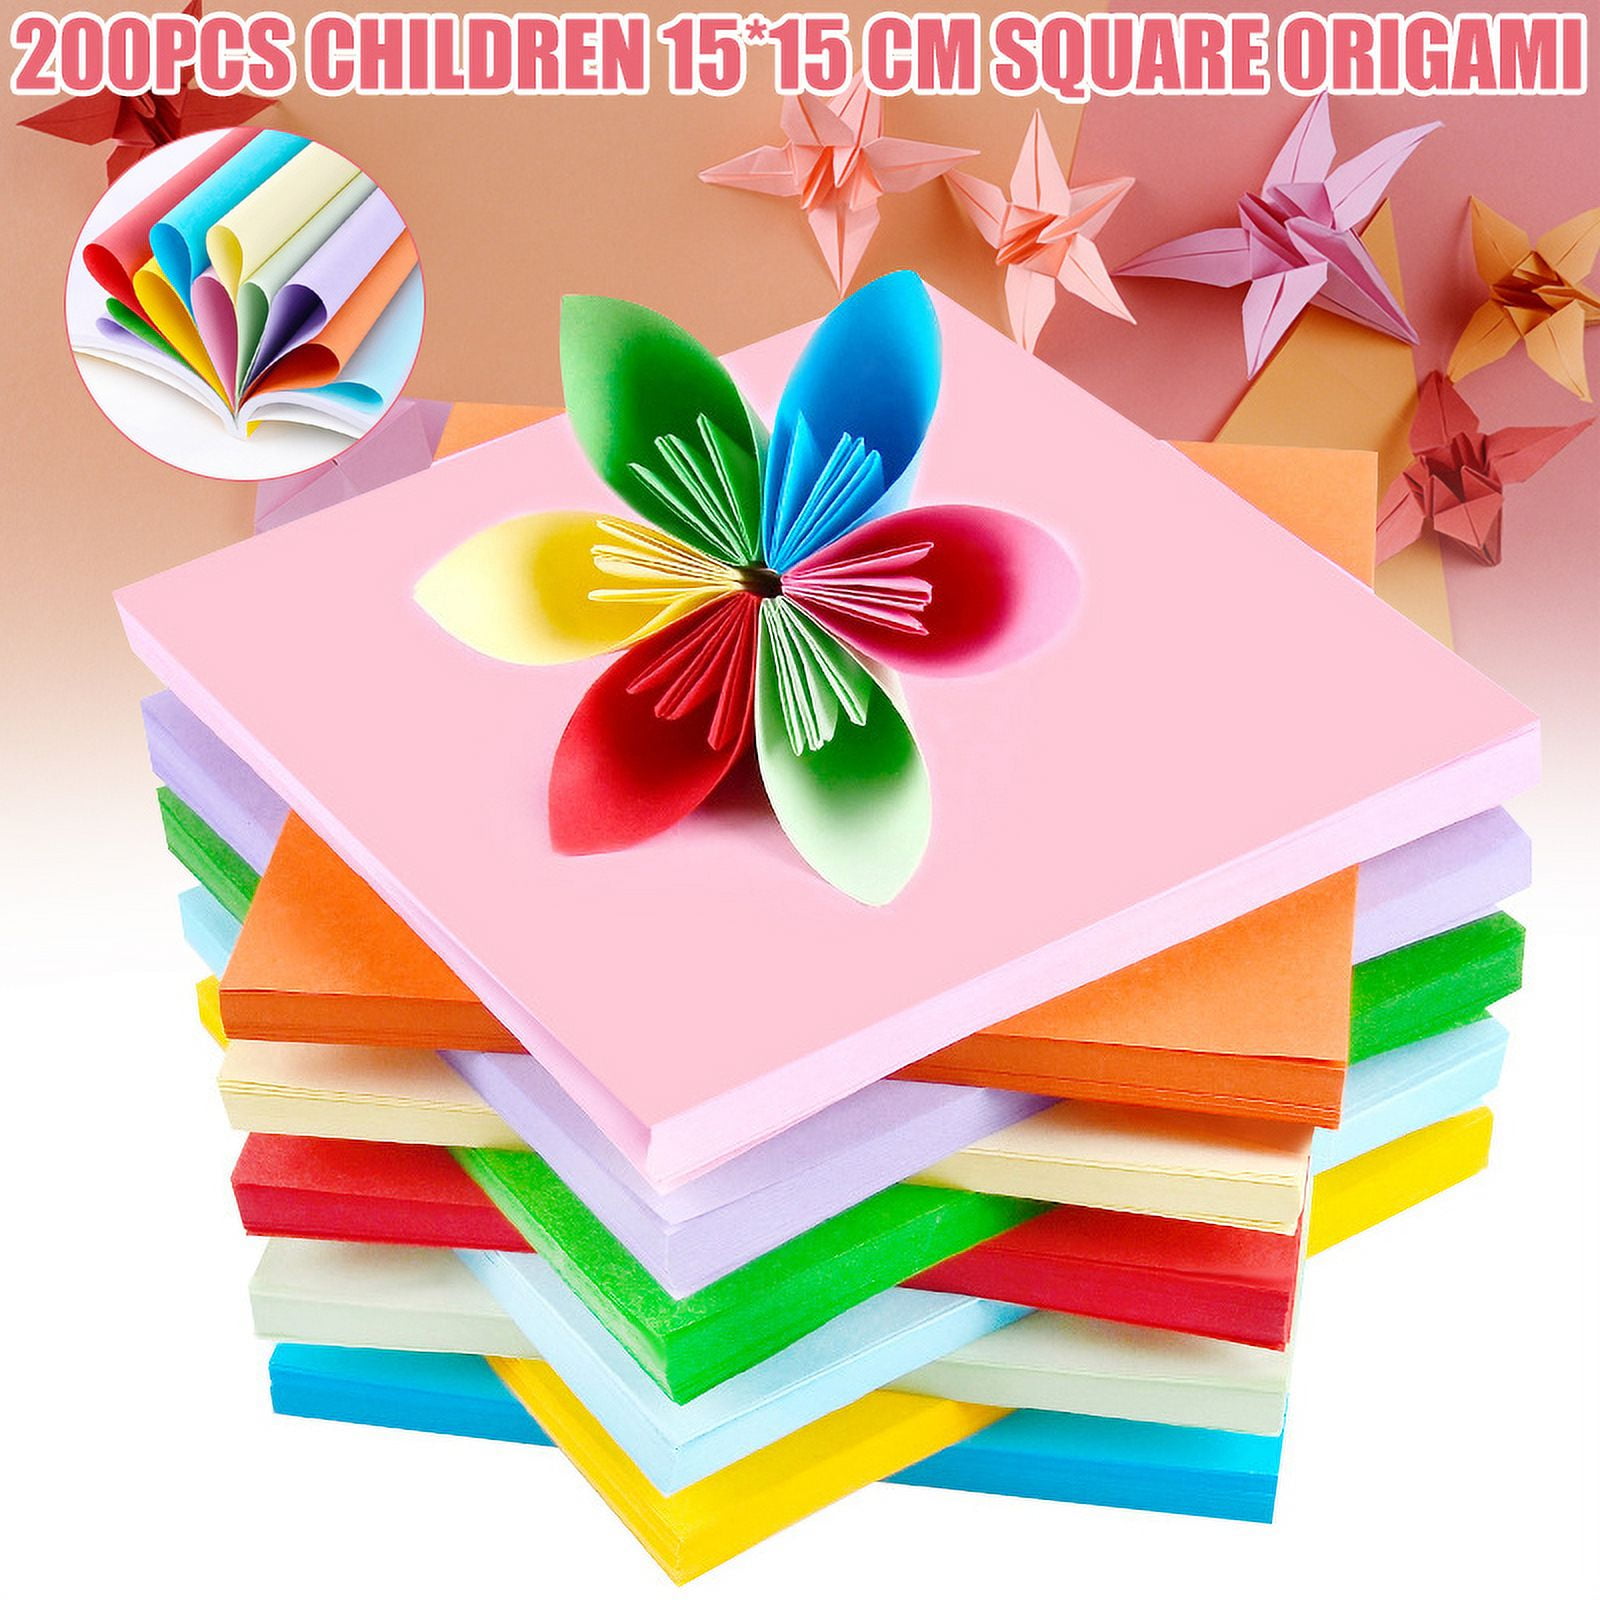  Origami Paper 200 Sheets, 20 Vivid Colors, Double Sided Colors  Make Colorful and Easy Origami,6 Inch Square Sheet, for Kids & Adults,  Papers, Arts and Crafts Projects (200 Sheets) 